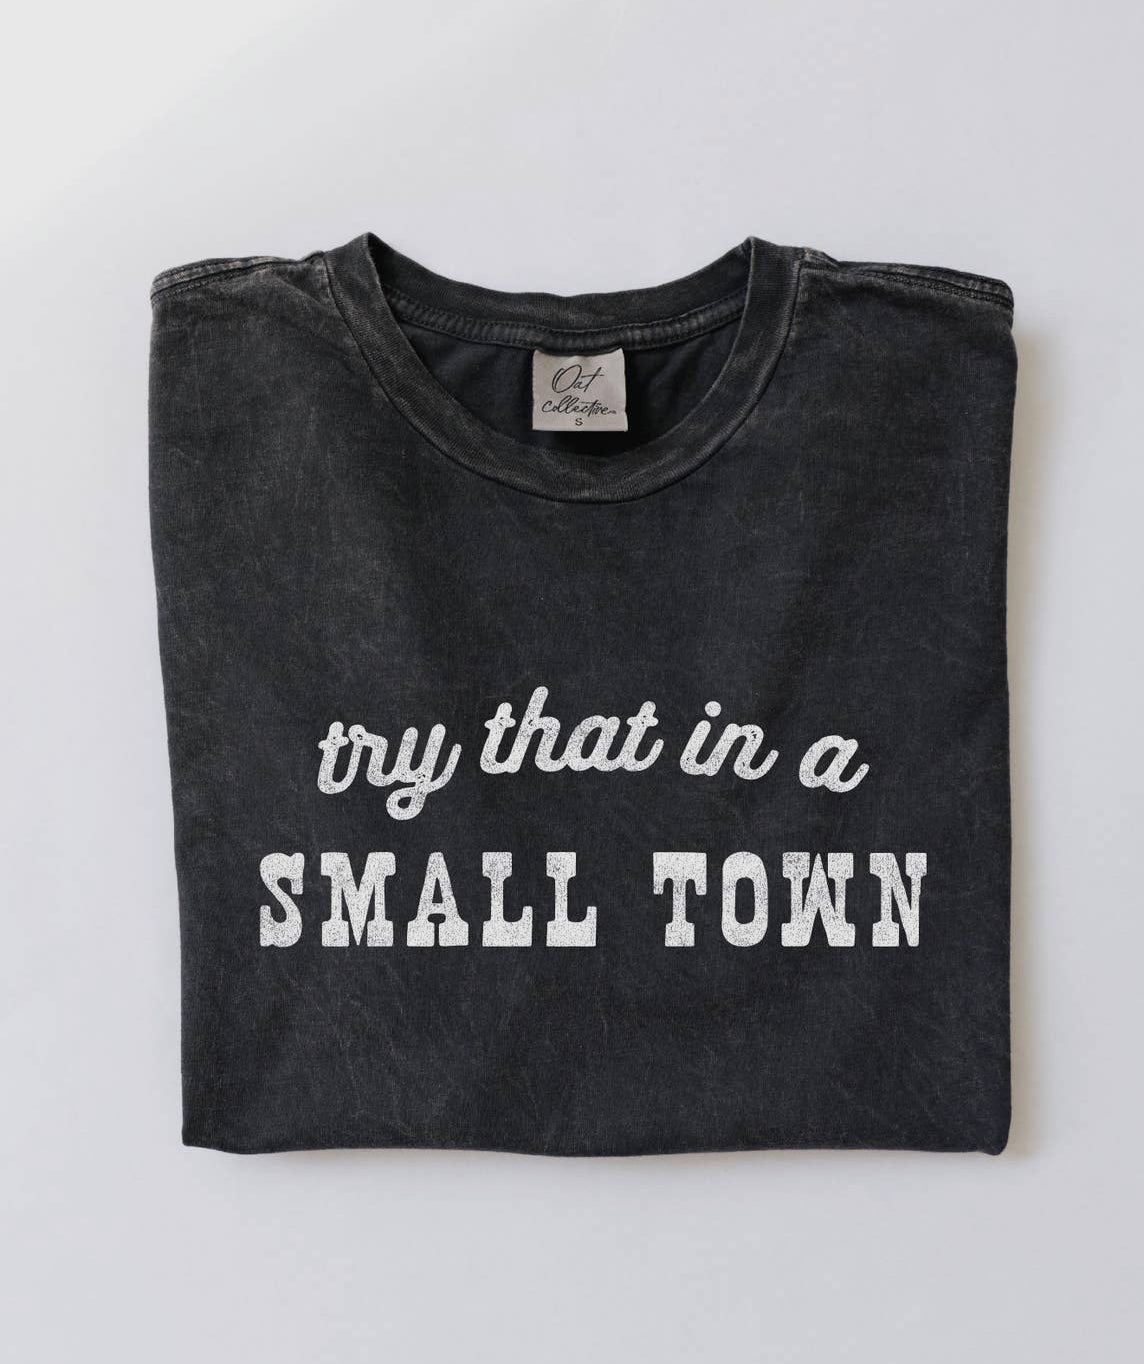 Try That in A Small Town Mineral Washed Graphic Top by Oat Collective